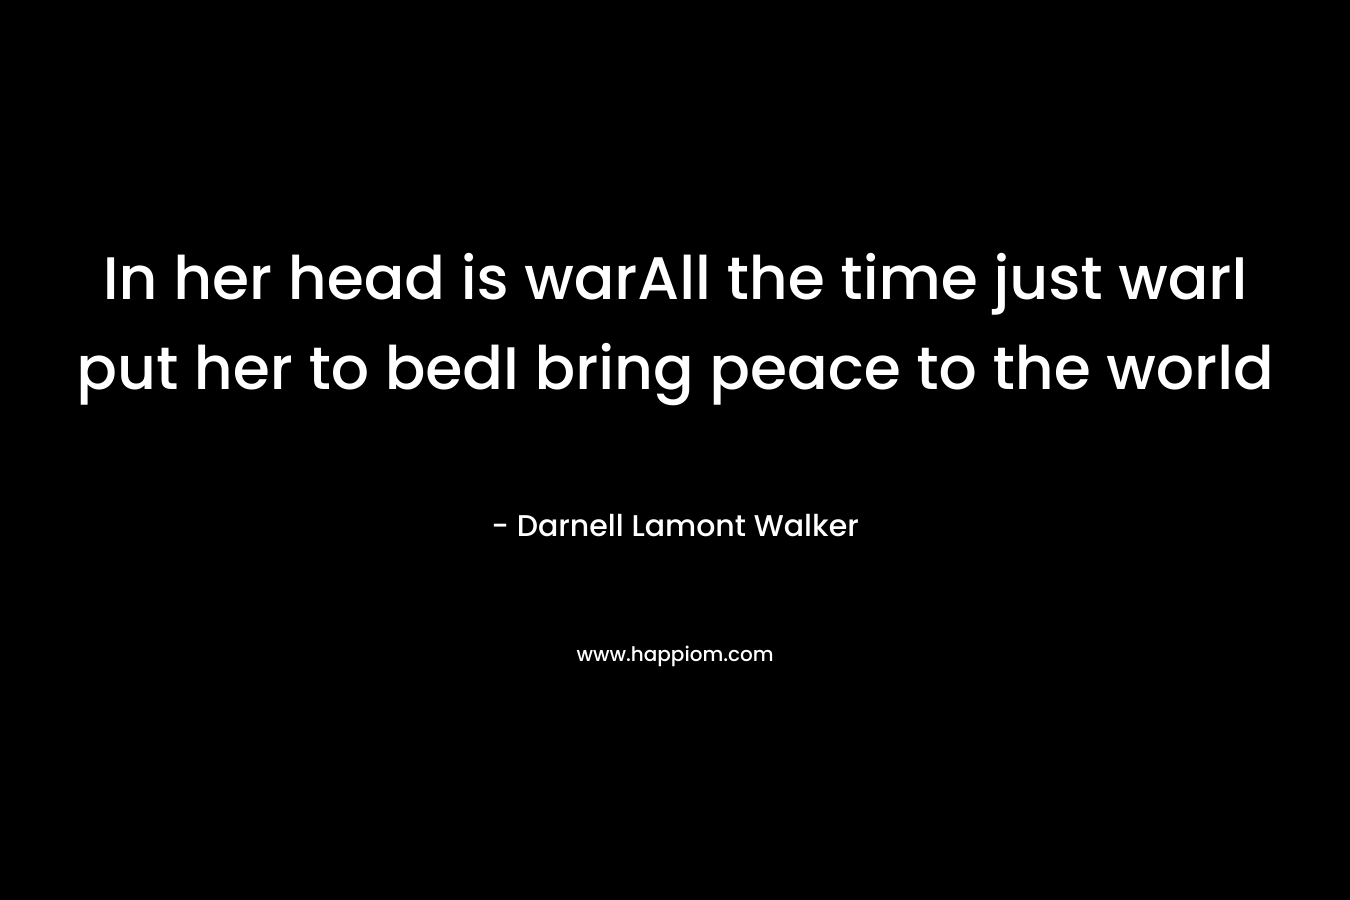 In her head is warAll the time just warI put her to bedI bring peace to the world – Darnell Lamont Walker